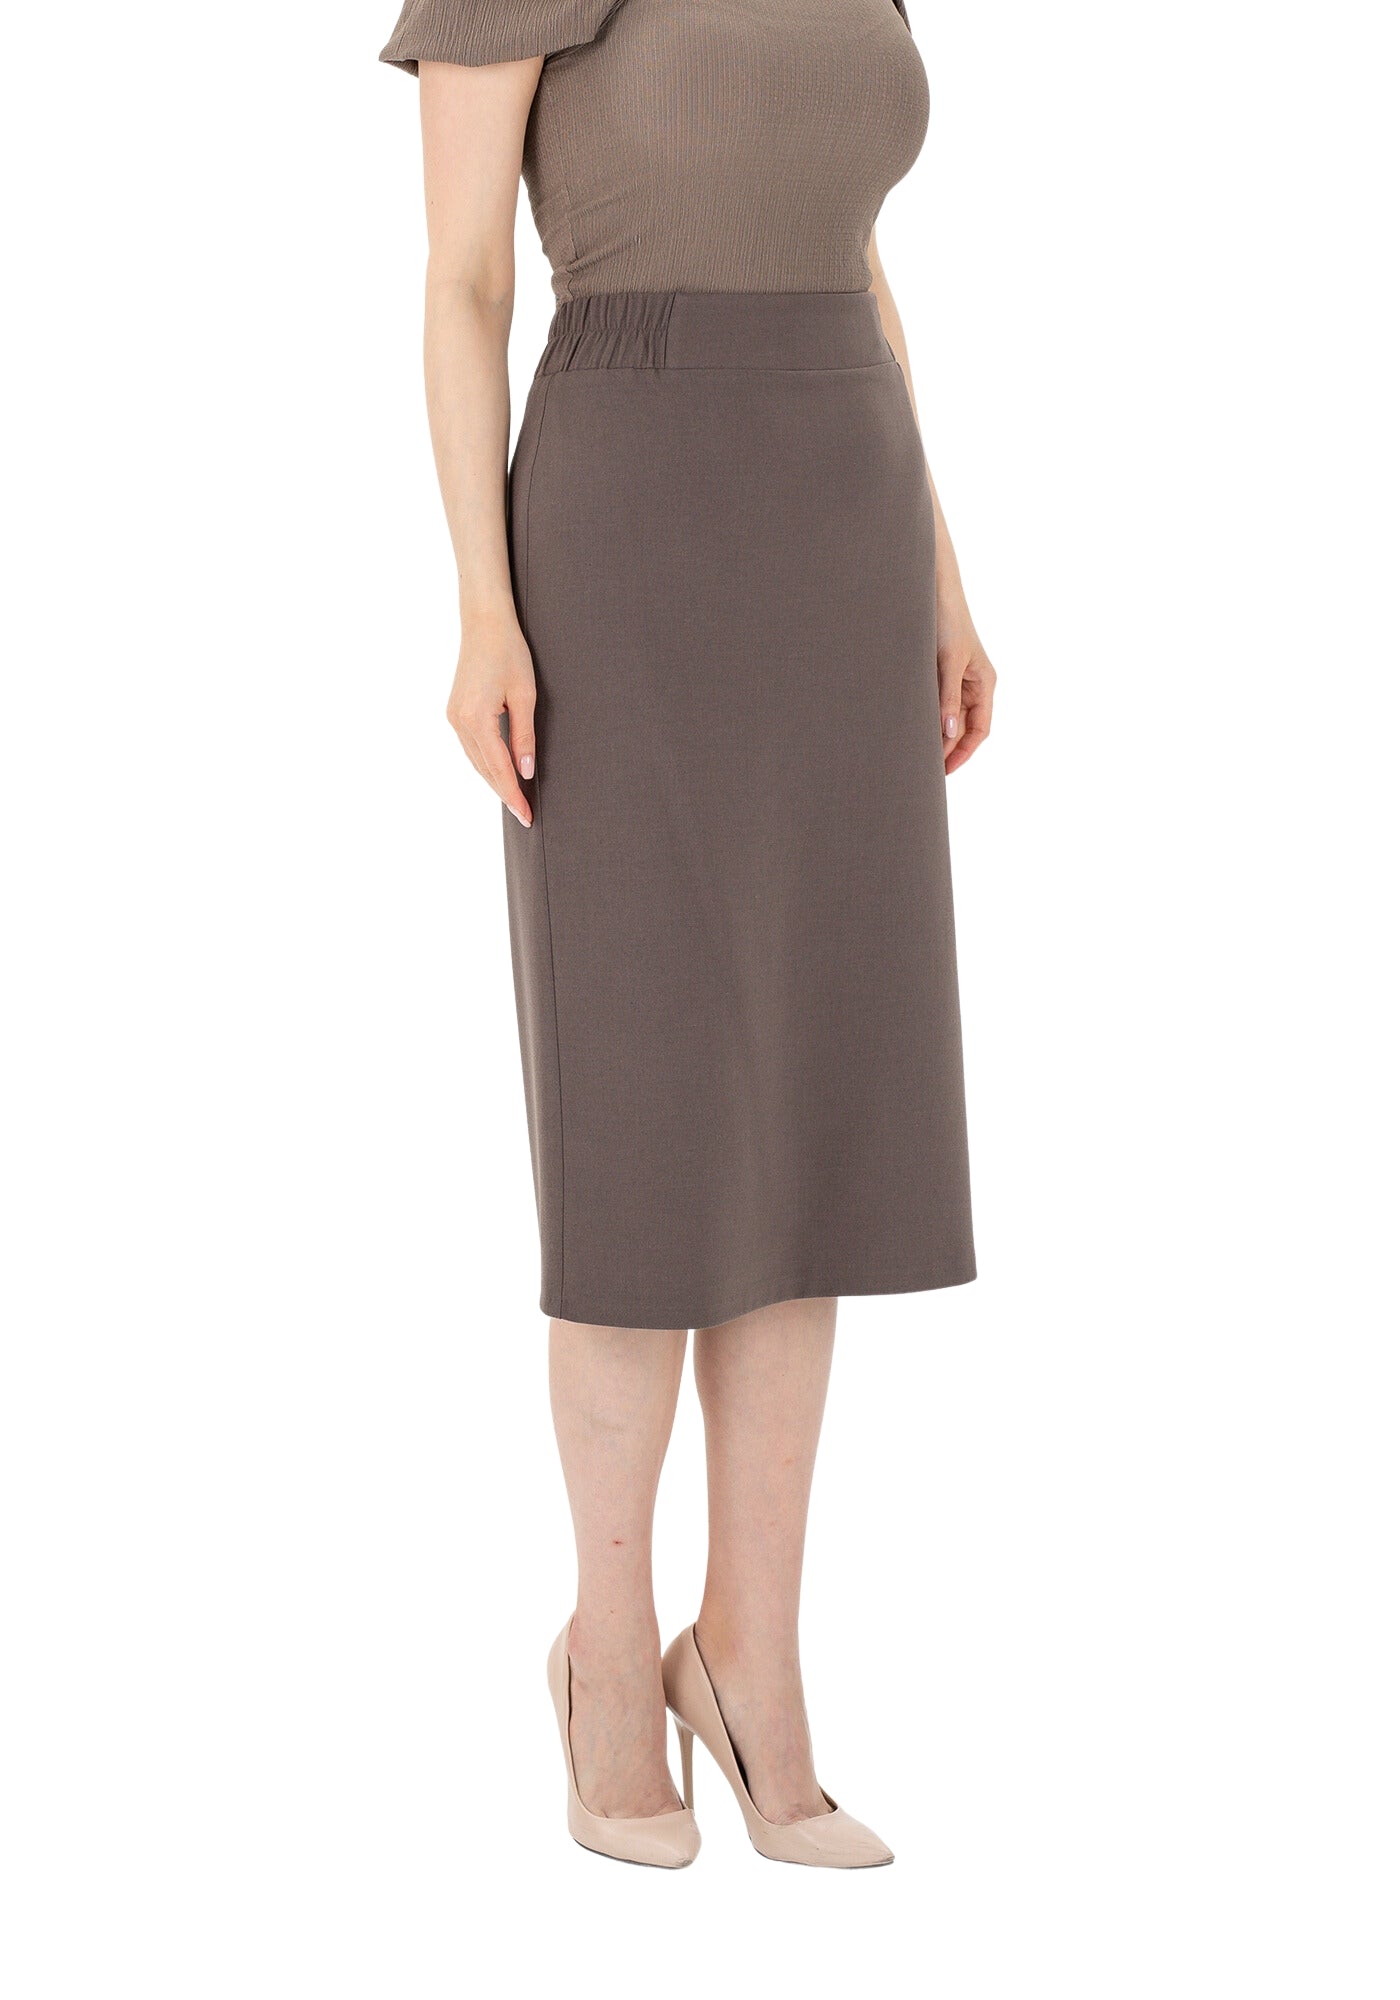 Mink Midi Pencil Skirt with Elastic Waist and Closed Back Vent G-Line